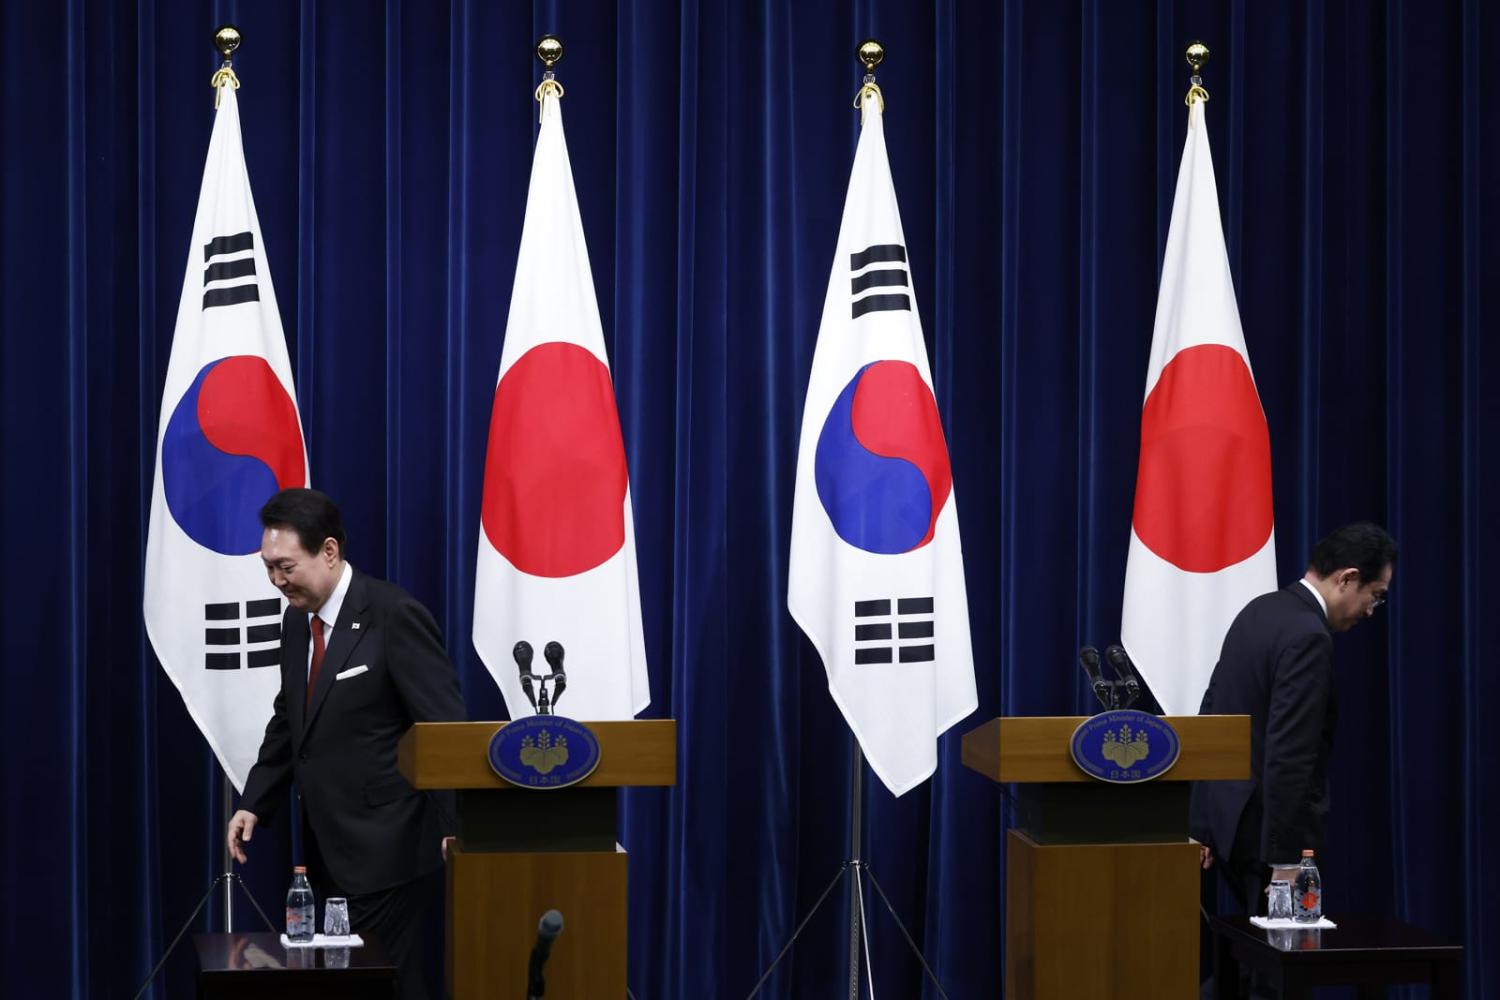 Yoon Suk-yeol, South Korea's president, left, and Fumio Kishida, Japan's prime minister, leave the stage after a joint news conference in Tokyo in March (Kiyoshi Ota/Bloomberg via Getty Images)